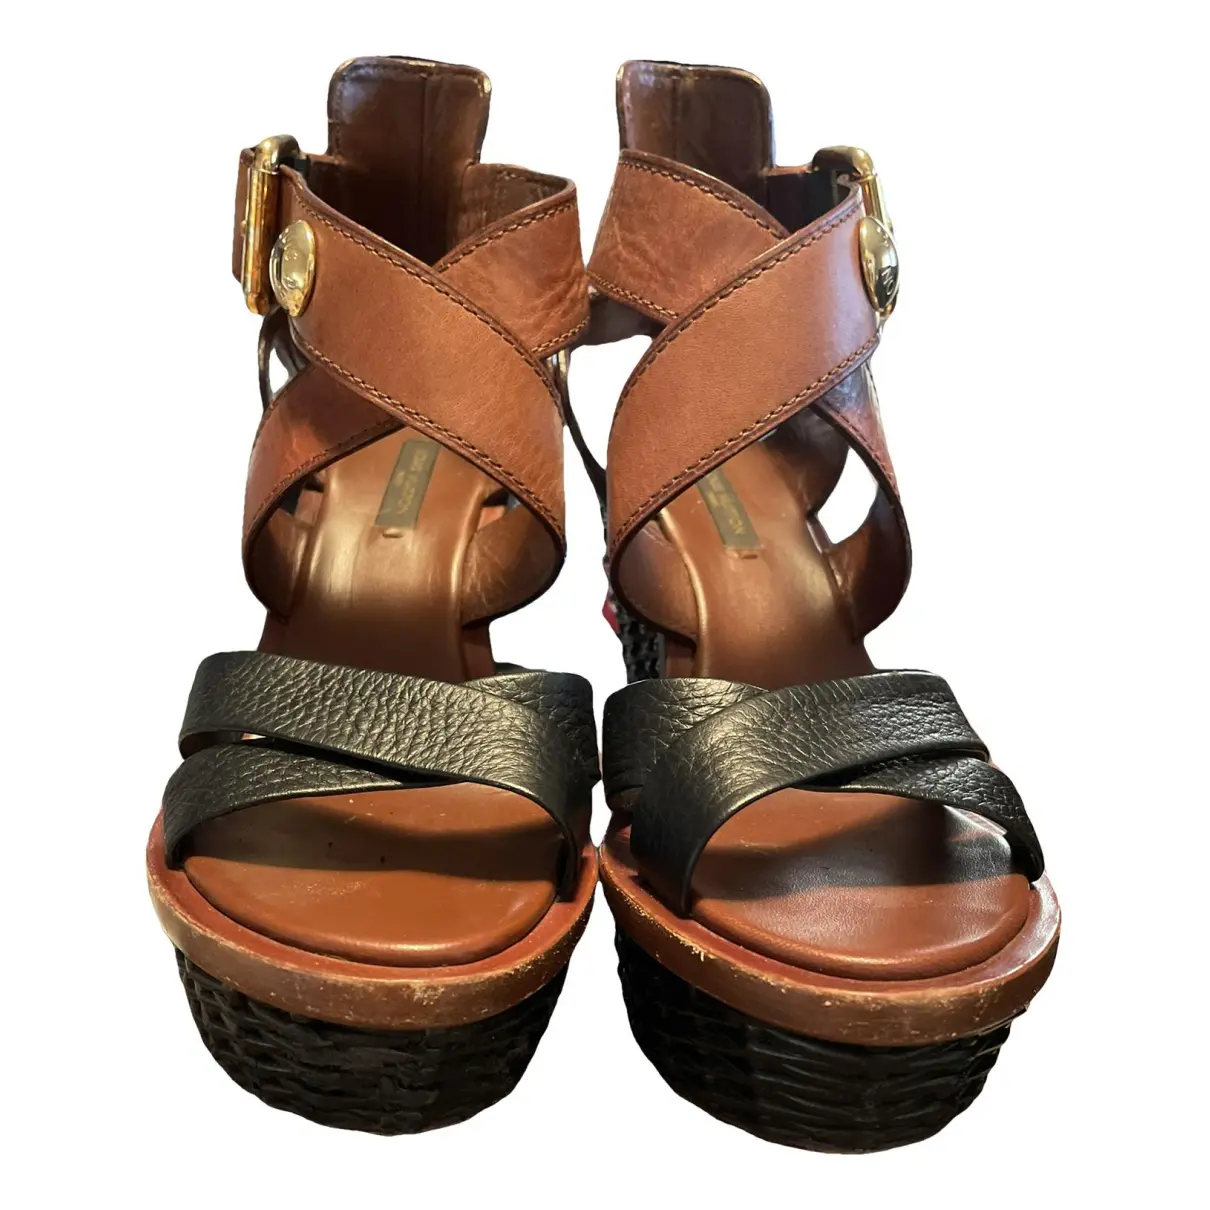 Star trail leather sandals